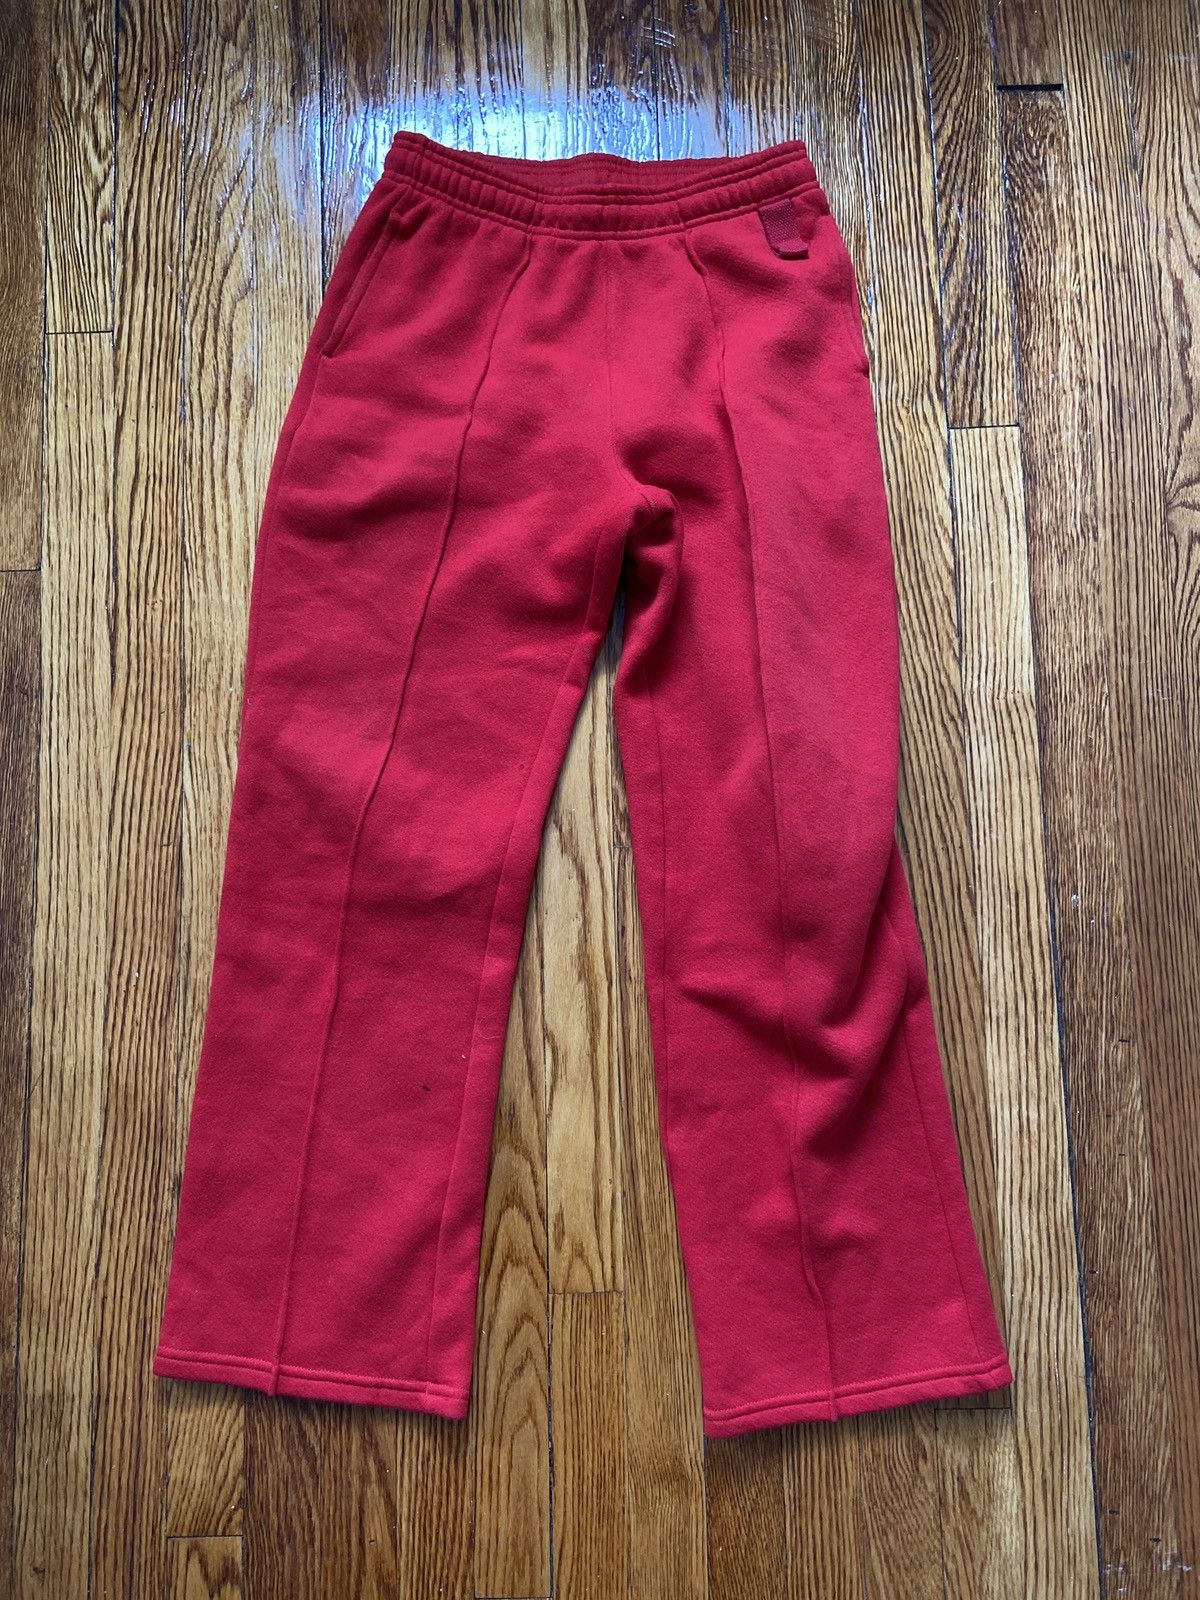 Assembly New York Pleated Sweats | Grailed